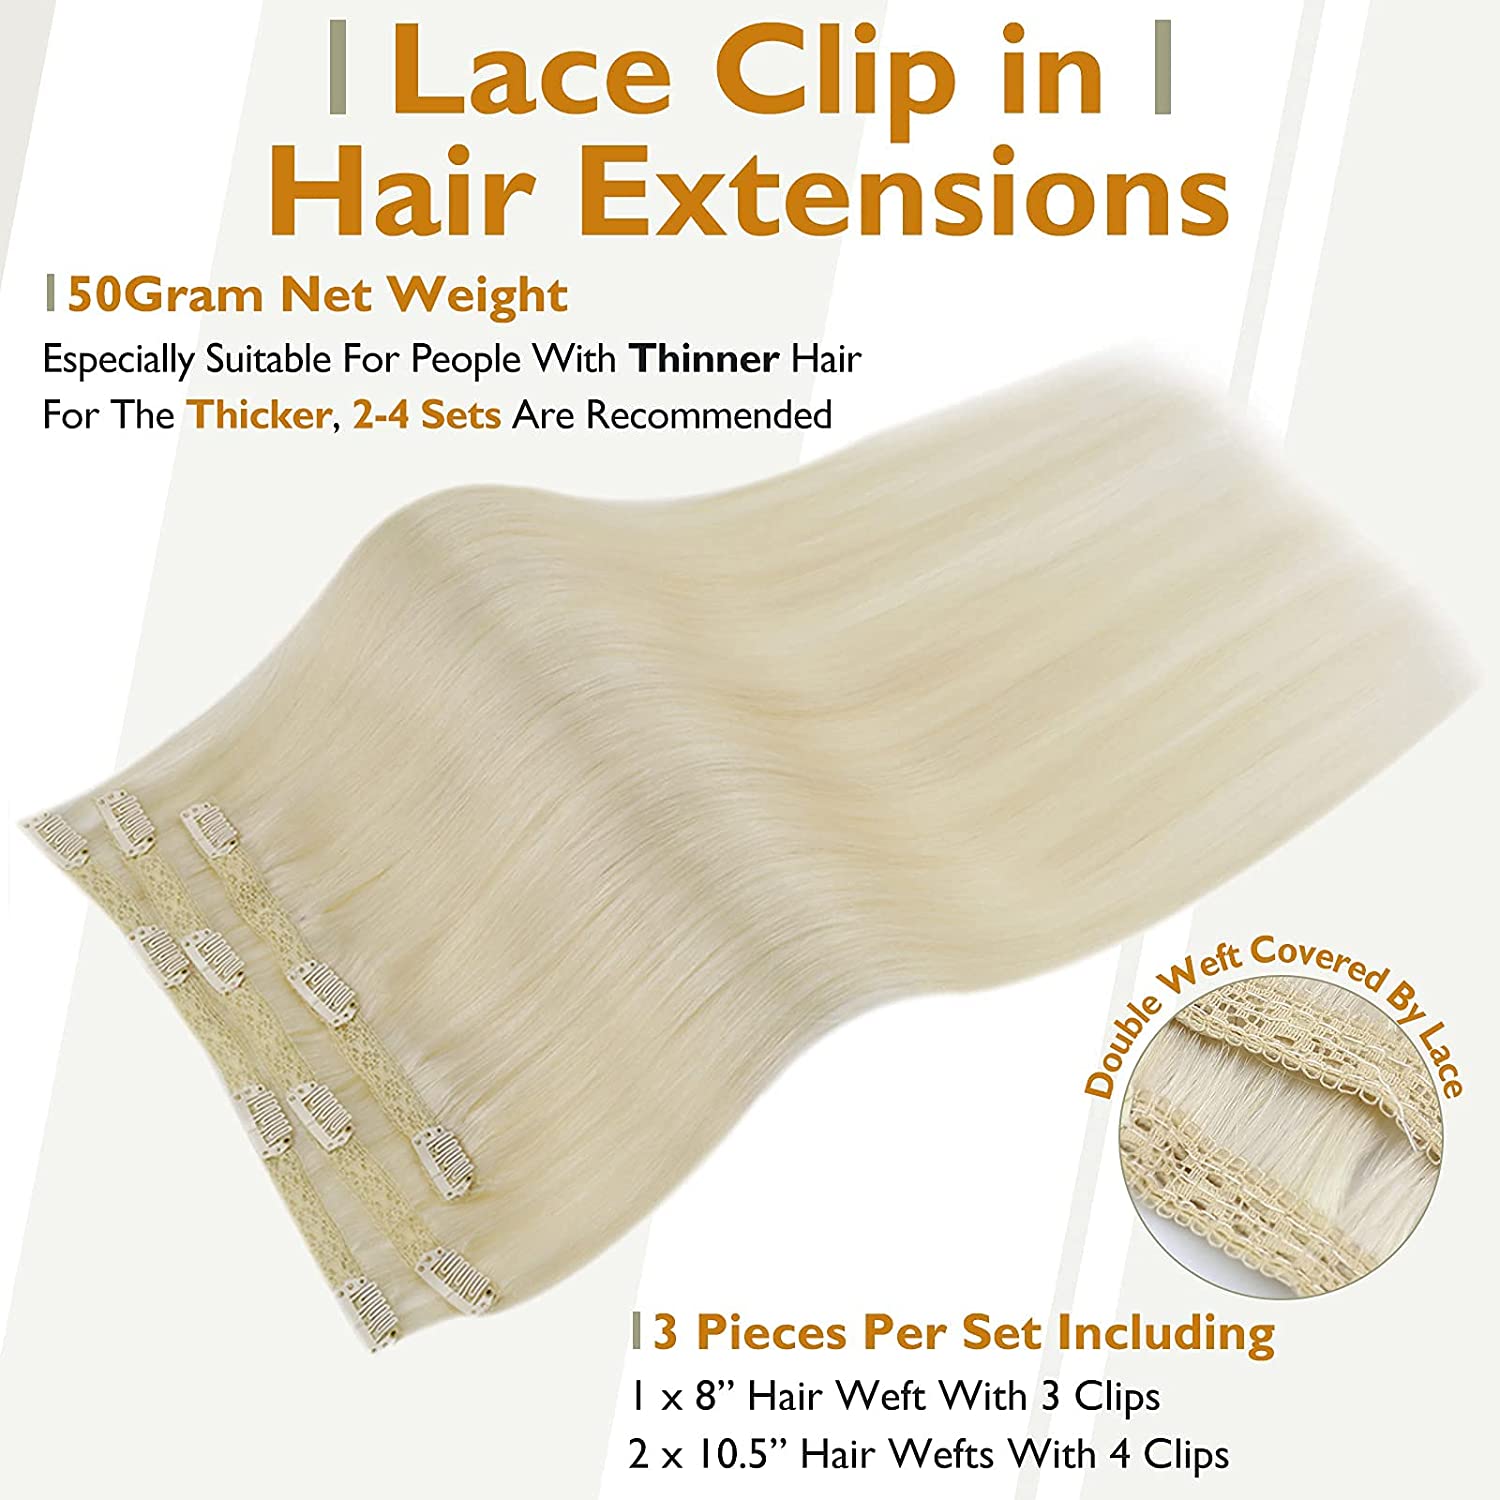 FShine Lace Clip In Hair Extensions Clip in Hair Extensions #60 - FShine Shop